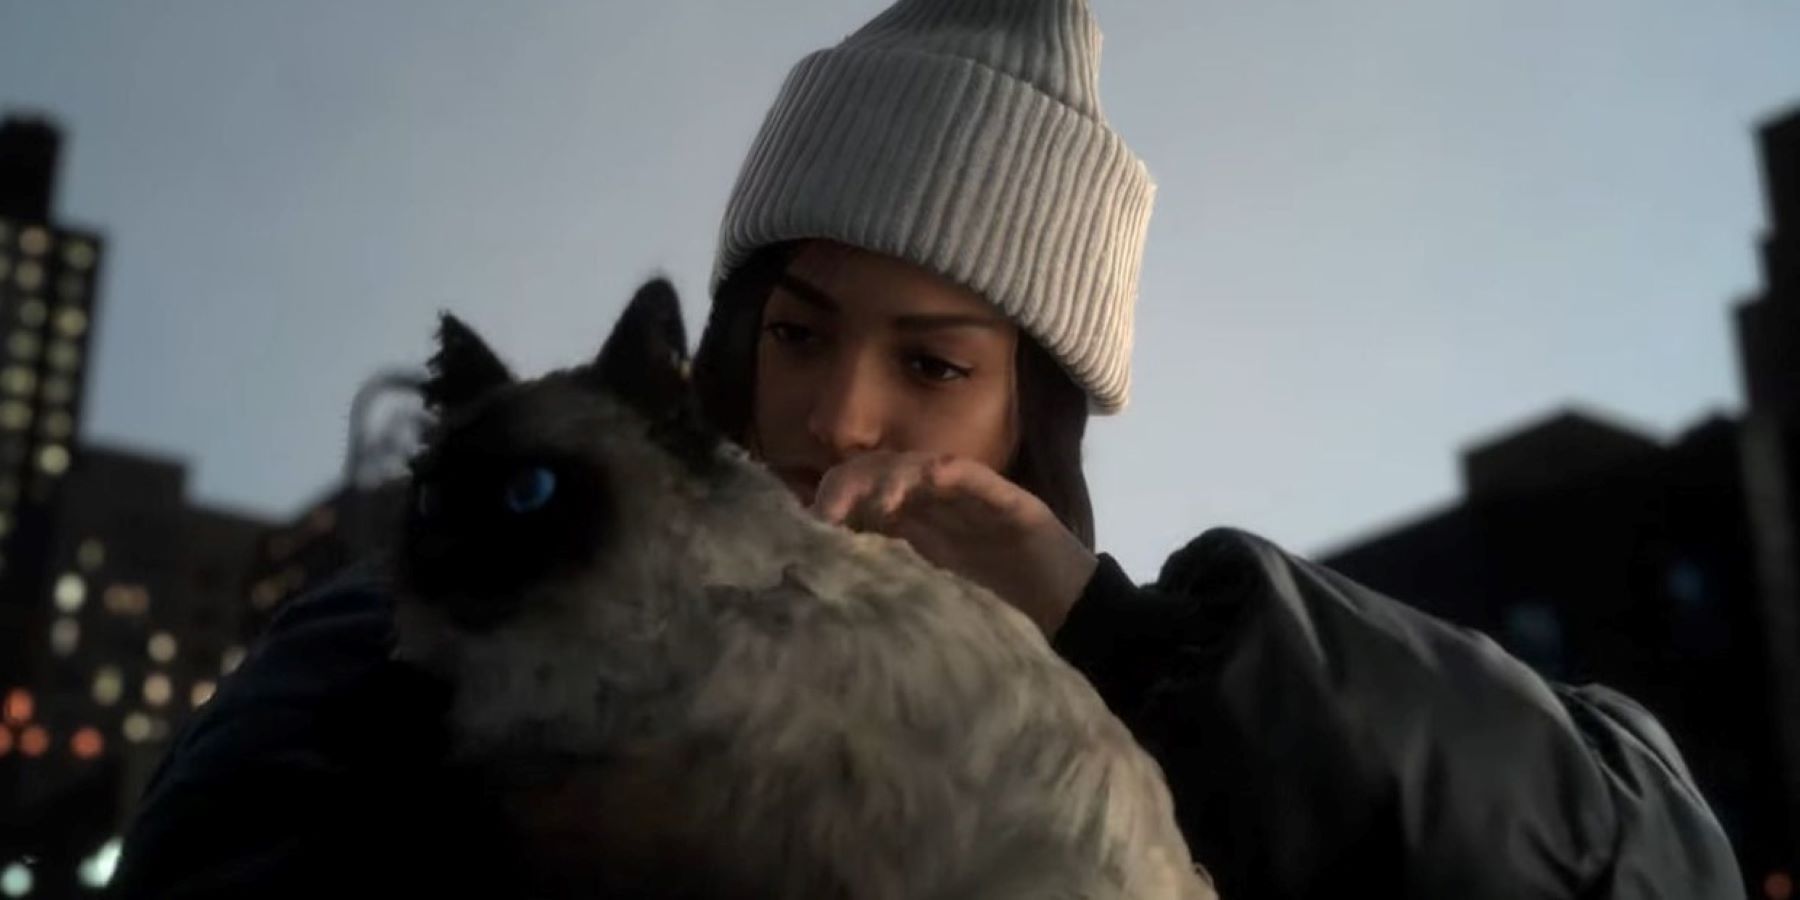 Forspoken protagonist Frey Holland petting her cat and walking through New York City